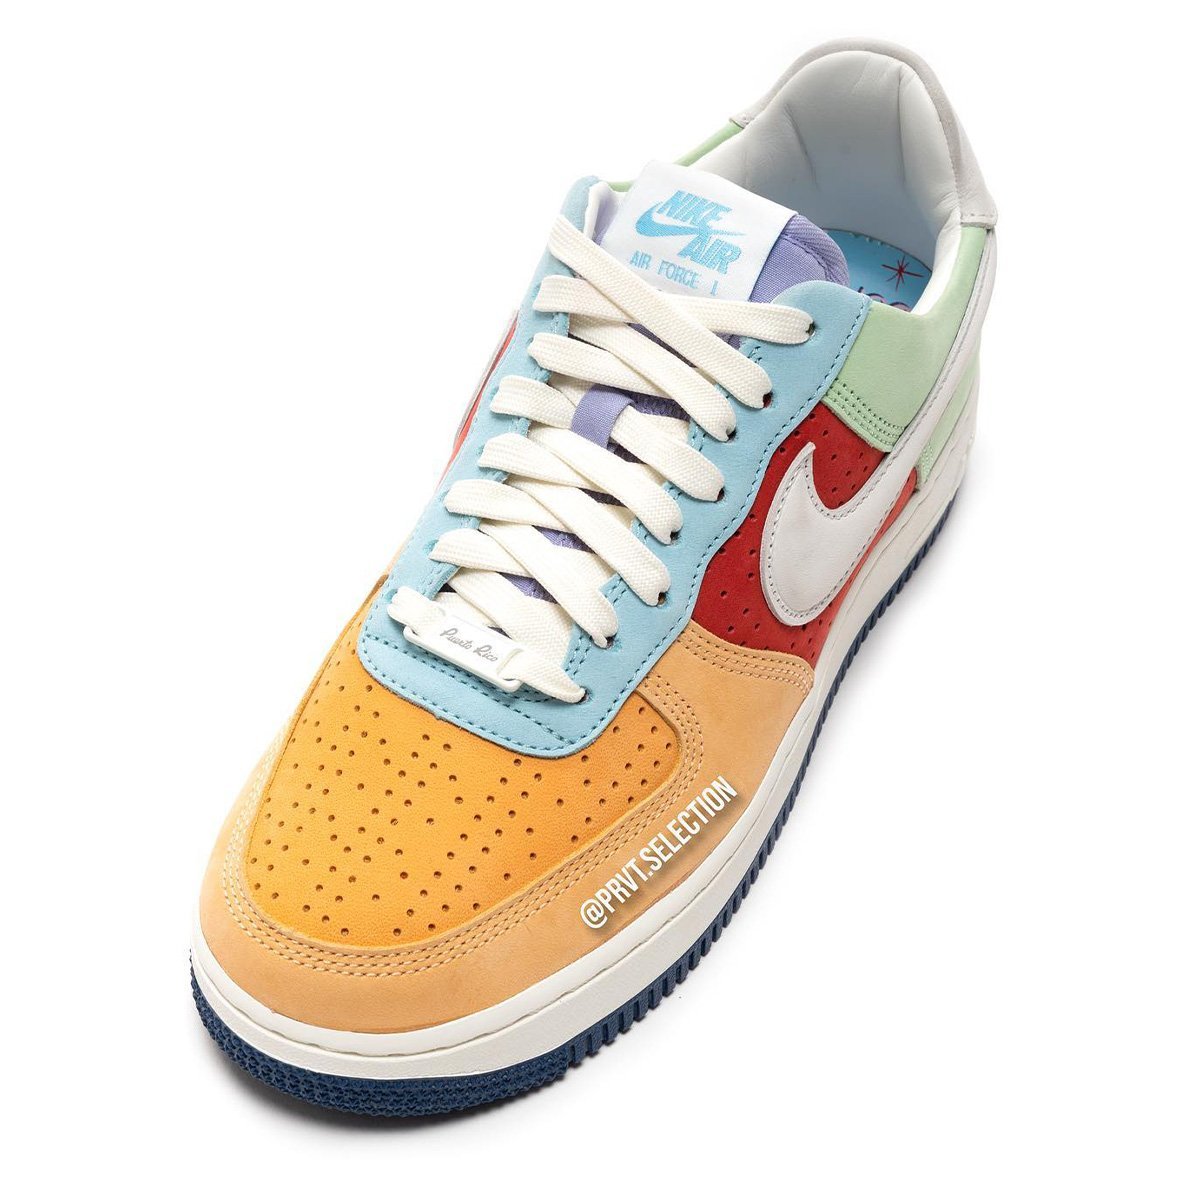 Nike Air Force 1 Low Boricua Puerto Rico DX6504-900 Release Date Info